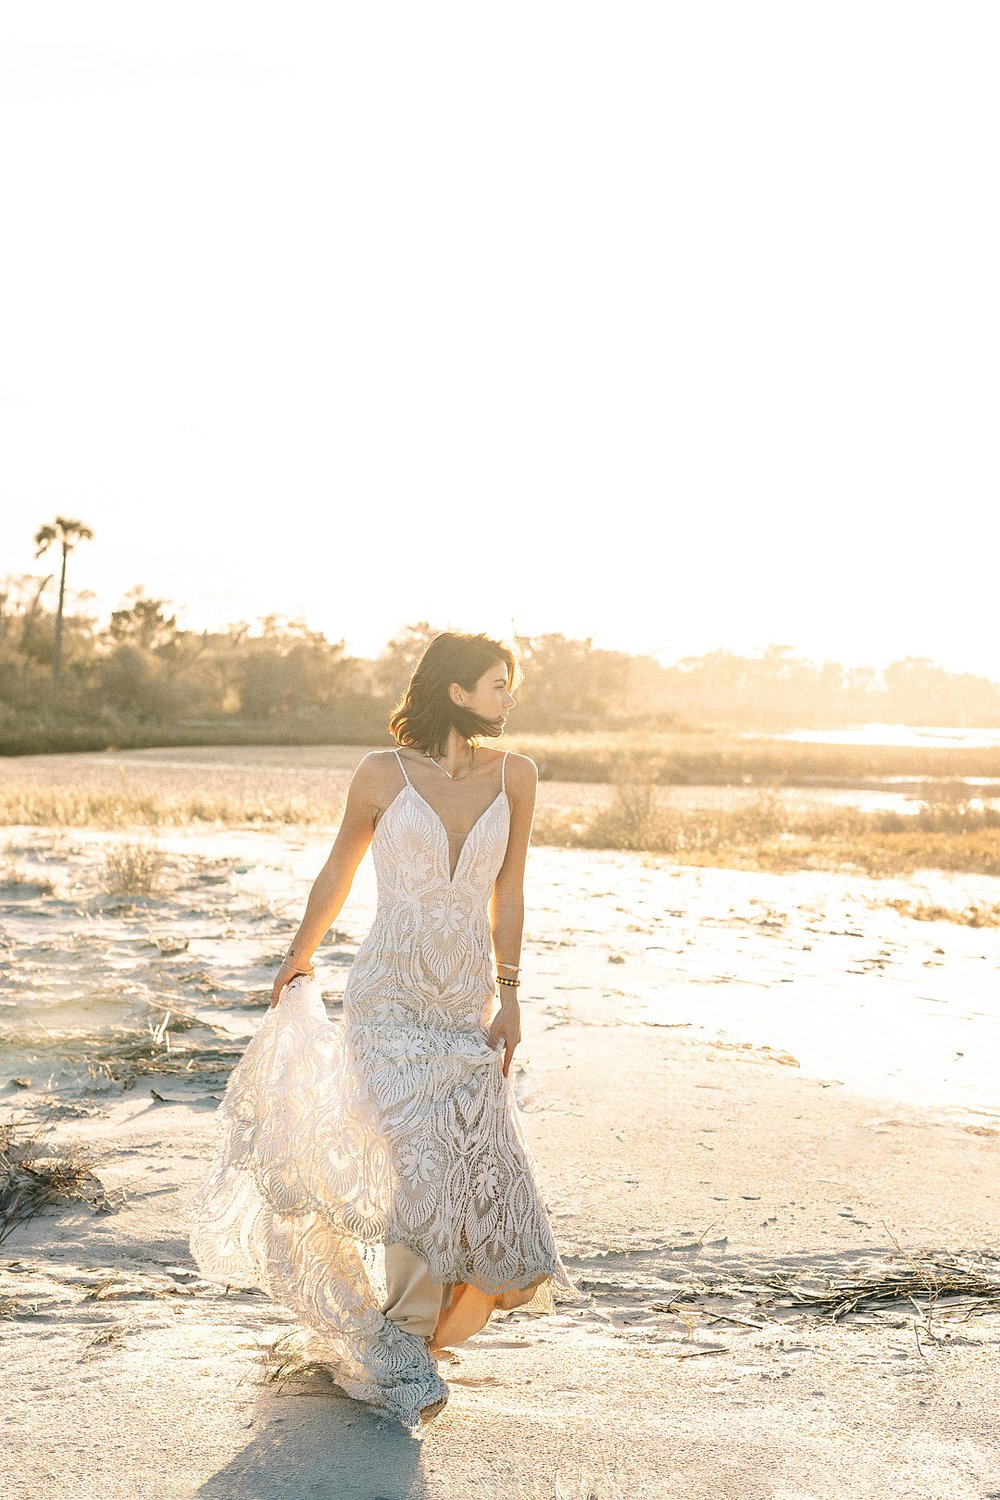 A beachy bridal moment_Carly Terry Photography_AW BRIDAL-0543_low.jpg